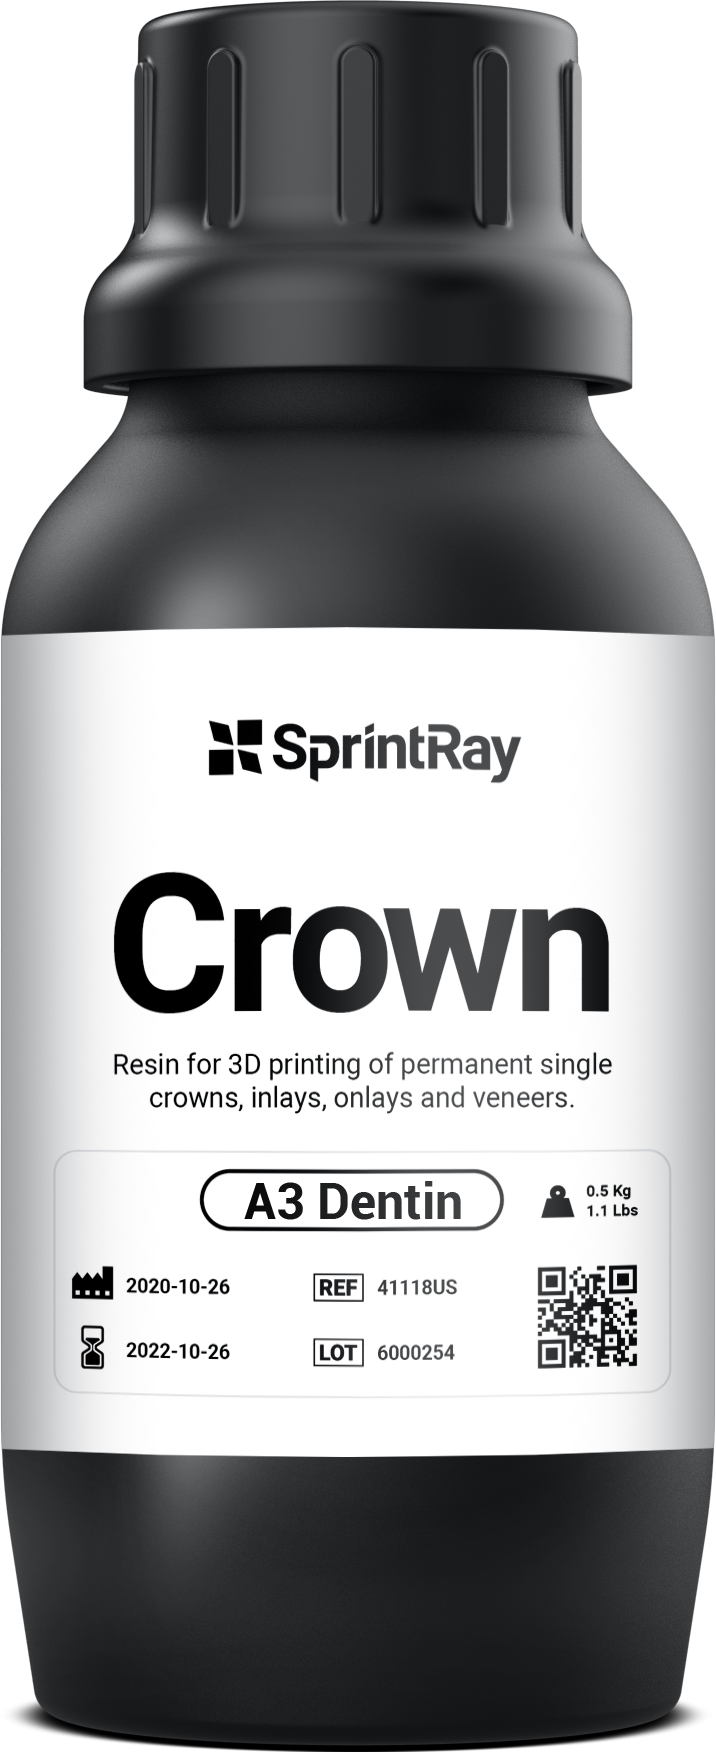 Printing crowns in less time than it takes to brew a cup of coffee_fig1